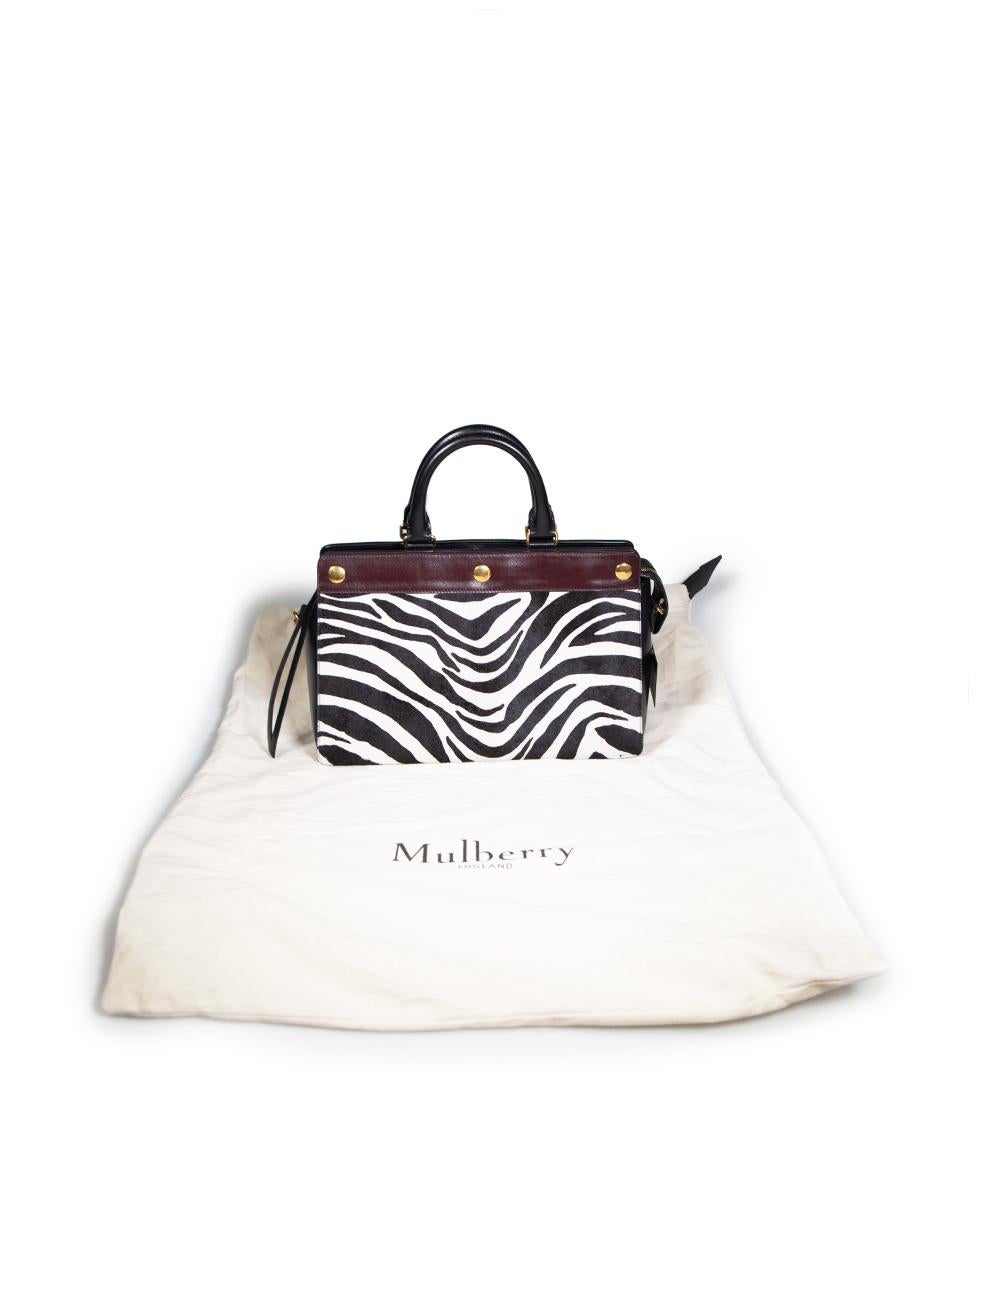 Mulberry Black Leather Chester Zebra Print Ponyhair Grab Bag For Sale 2